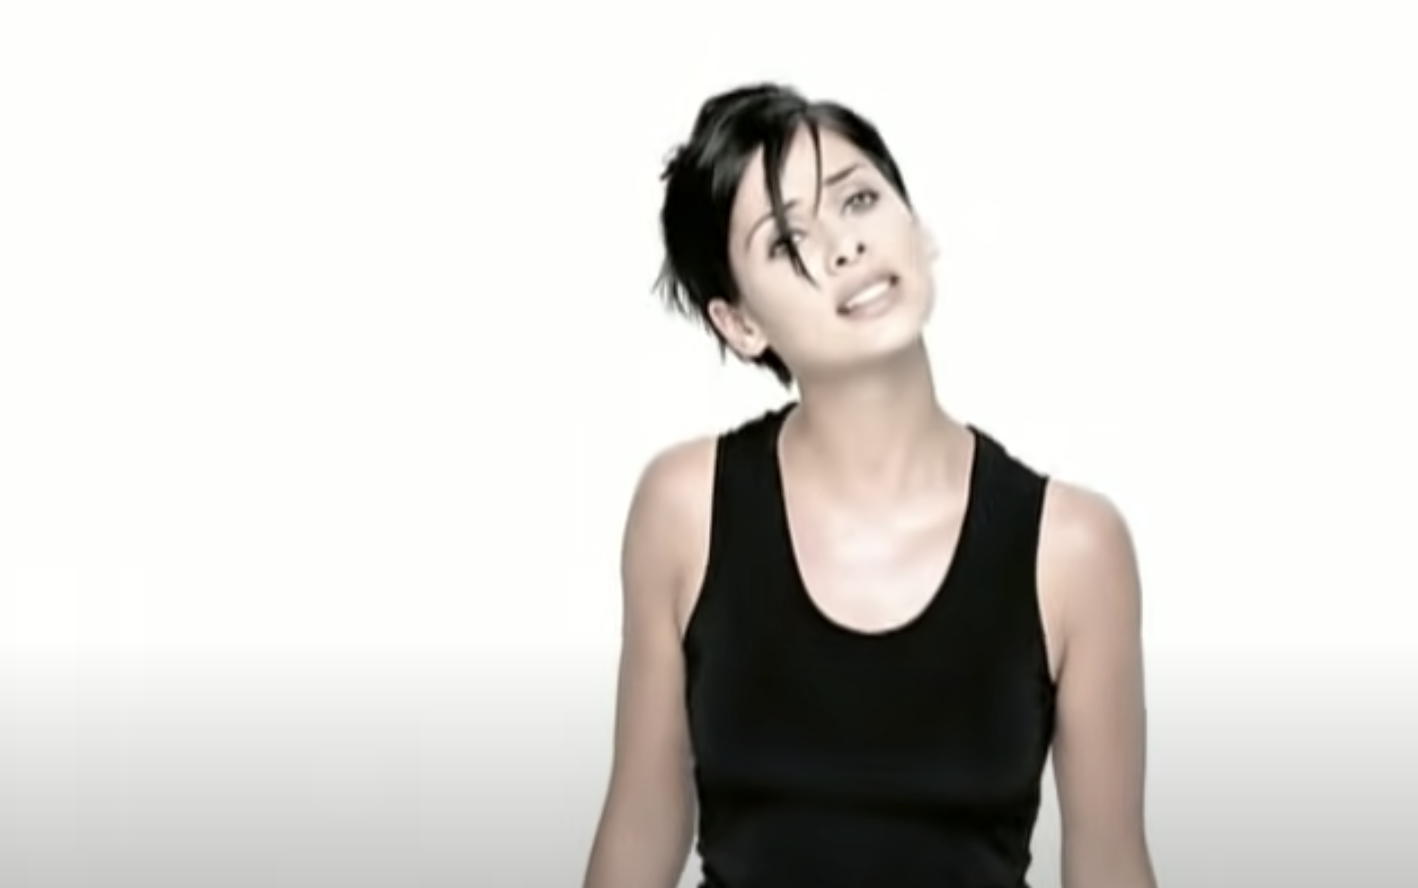 Natalie Imbruglia sings in a white room